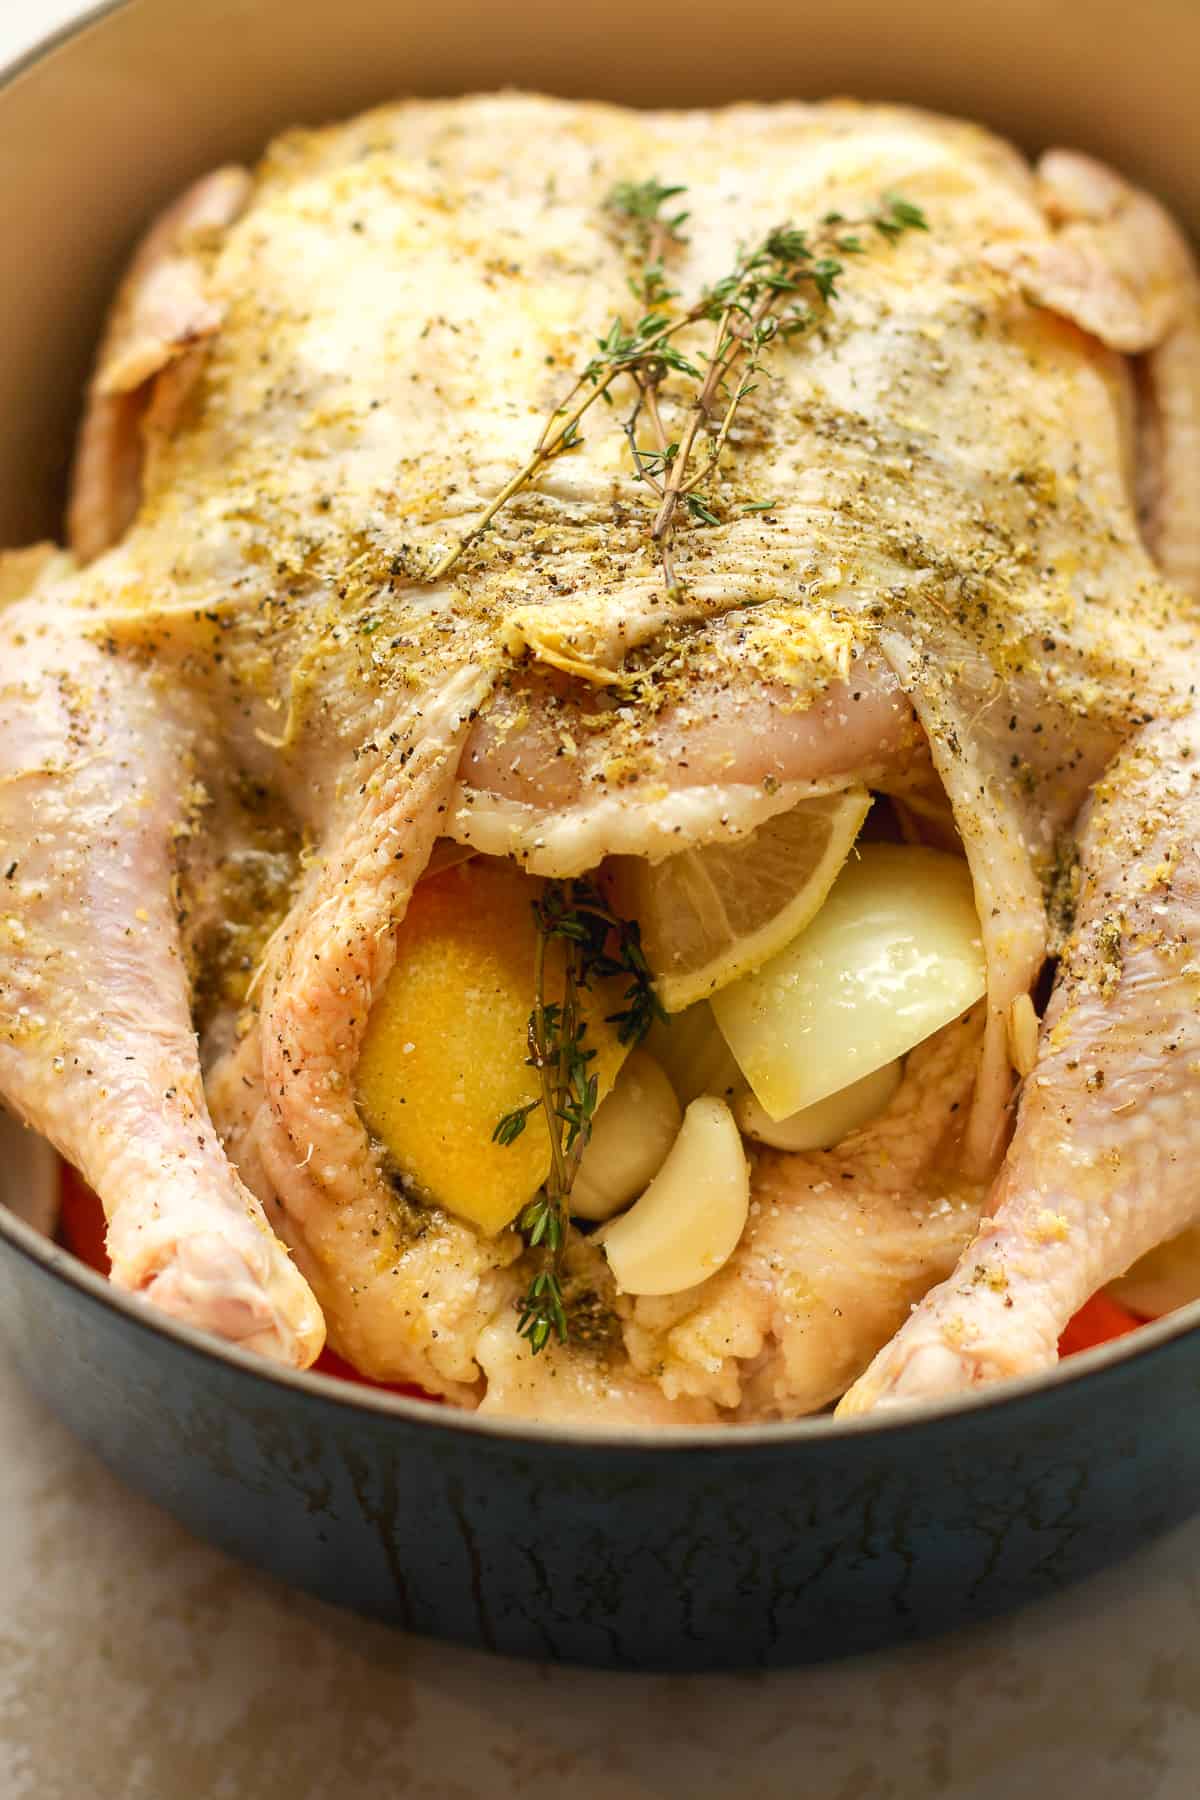 A raw chicken prepped for baking.